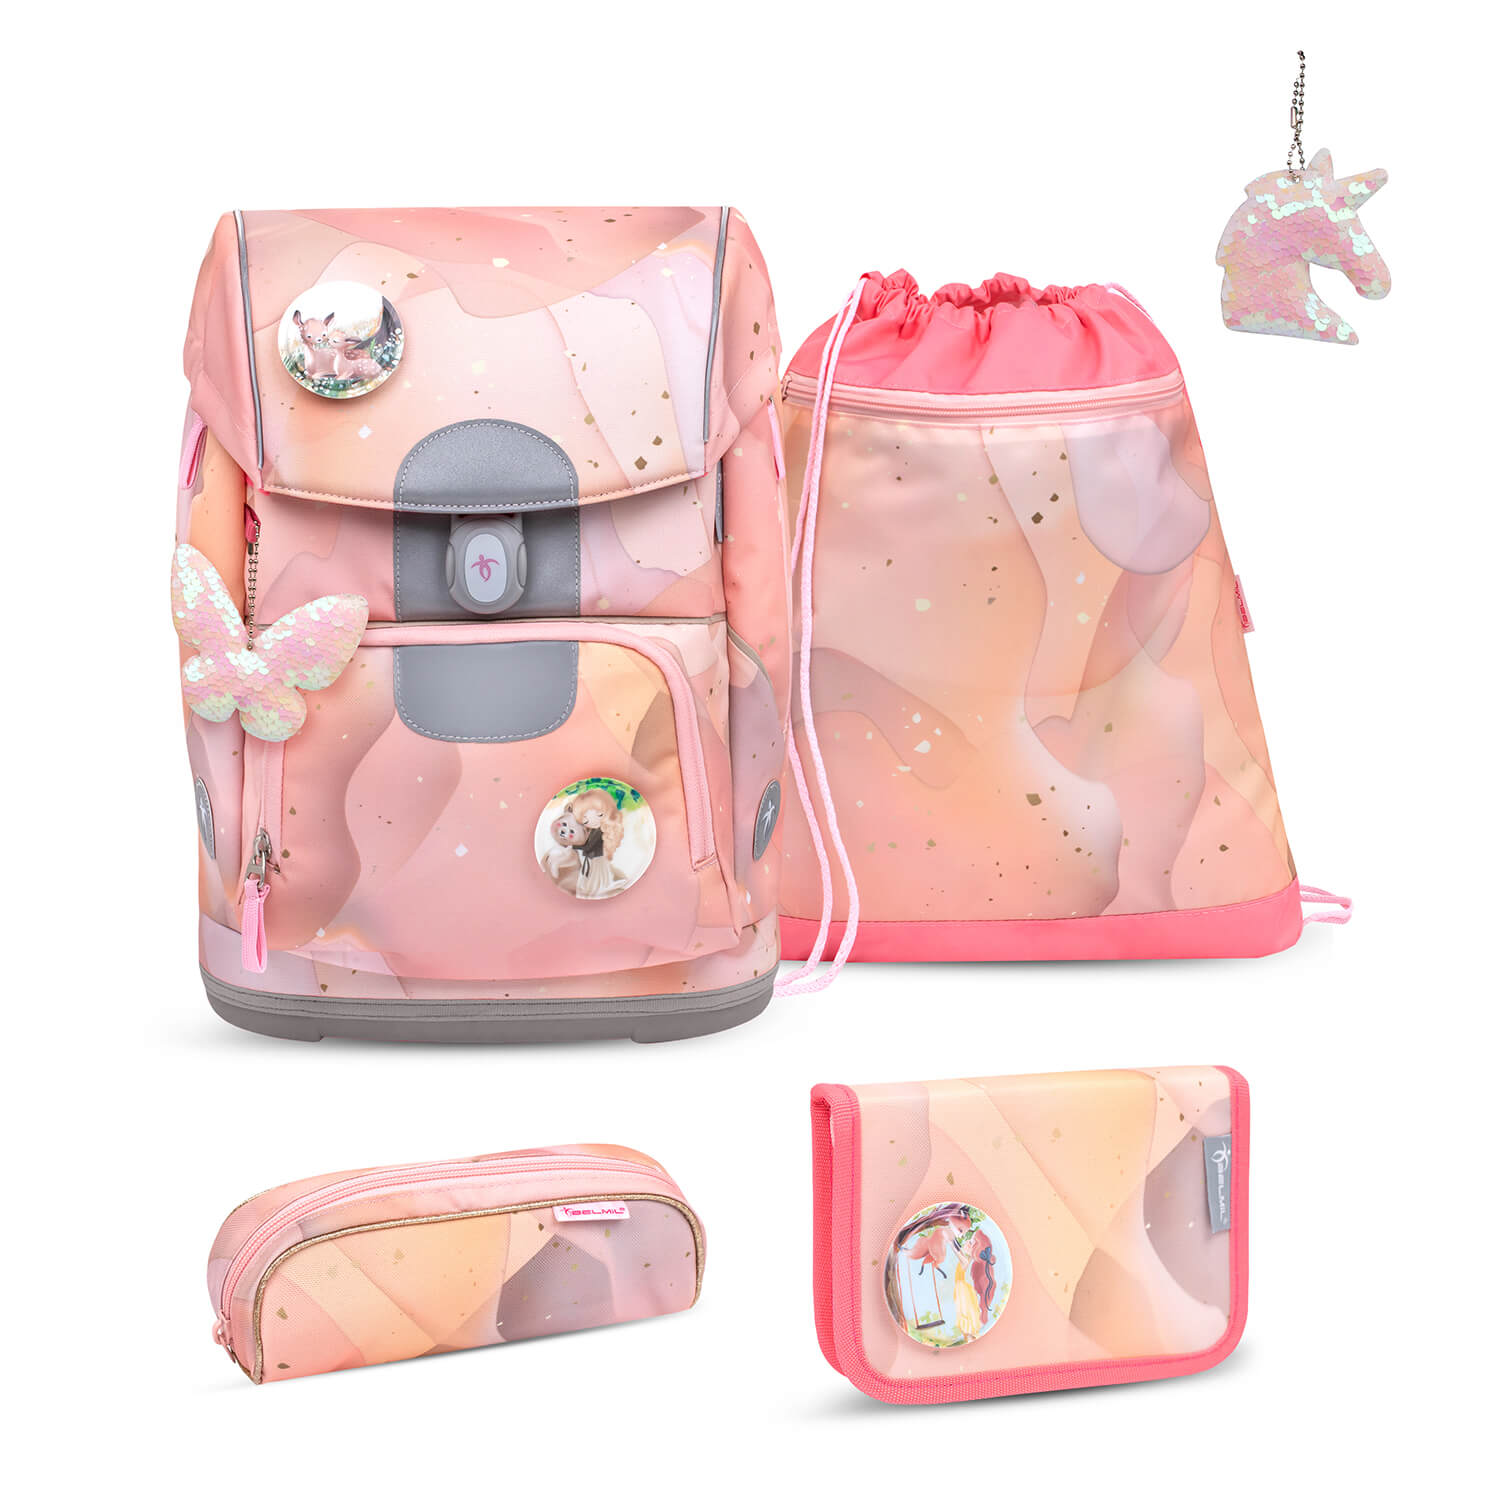 Motion Marble schoolbag set 6 pcs with GRATIS keychain